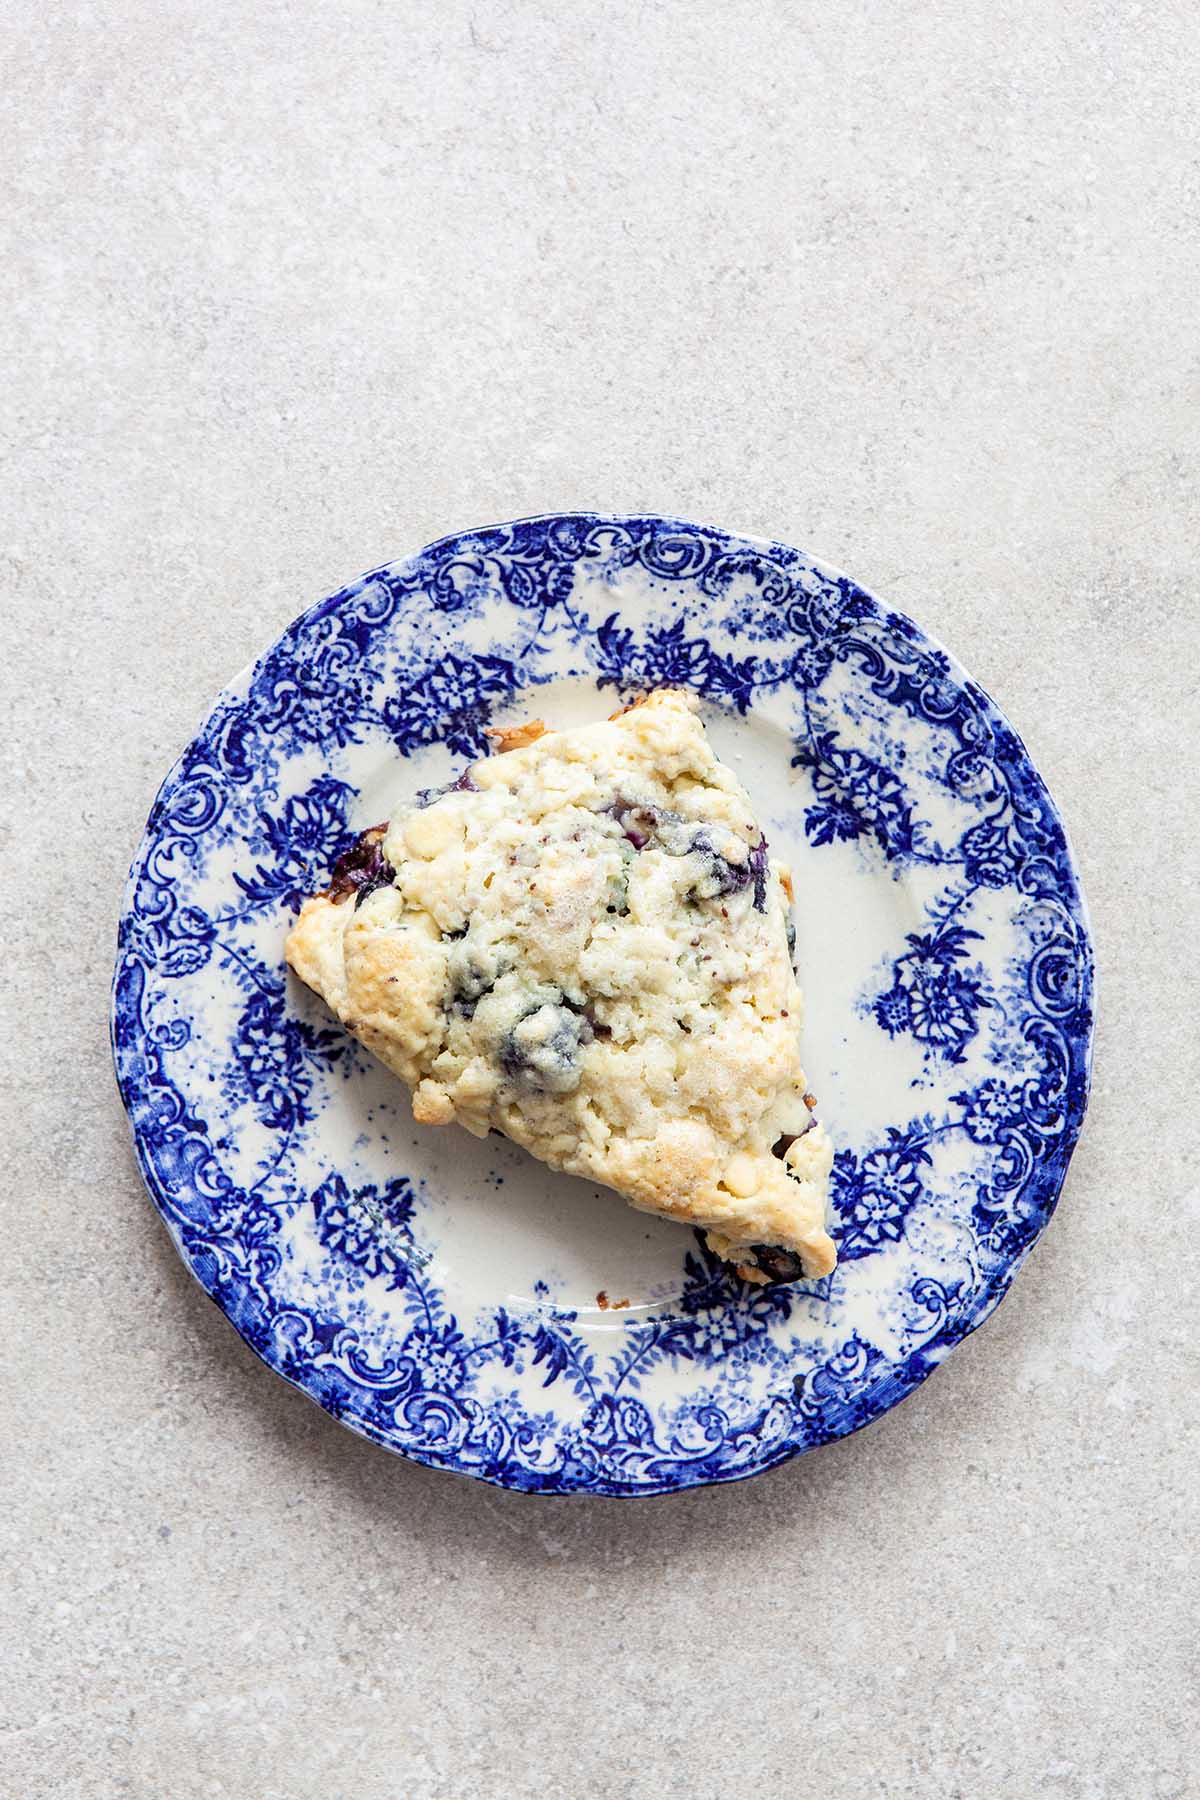 One scone on a blue and white plate laying on a stone surface.